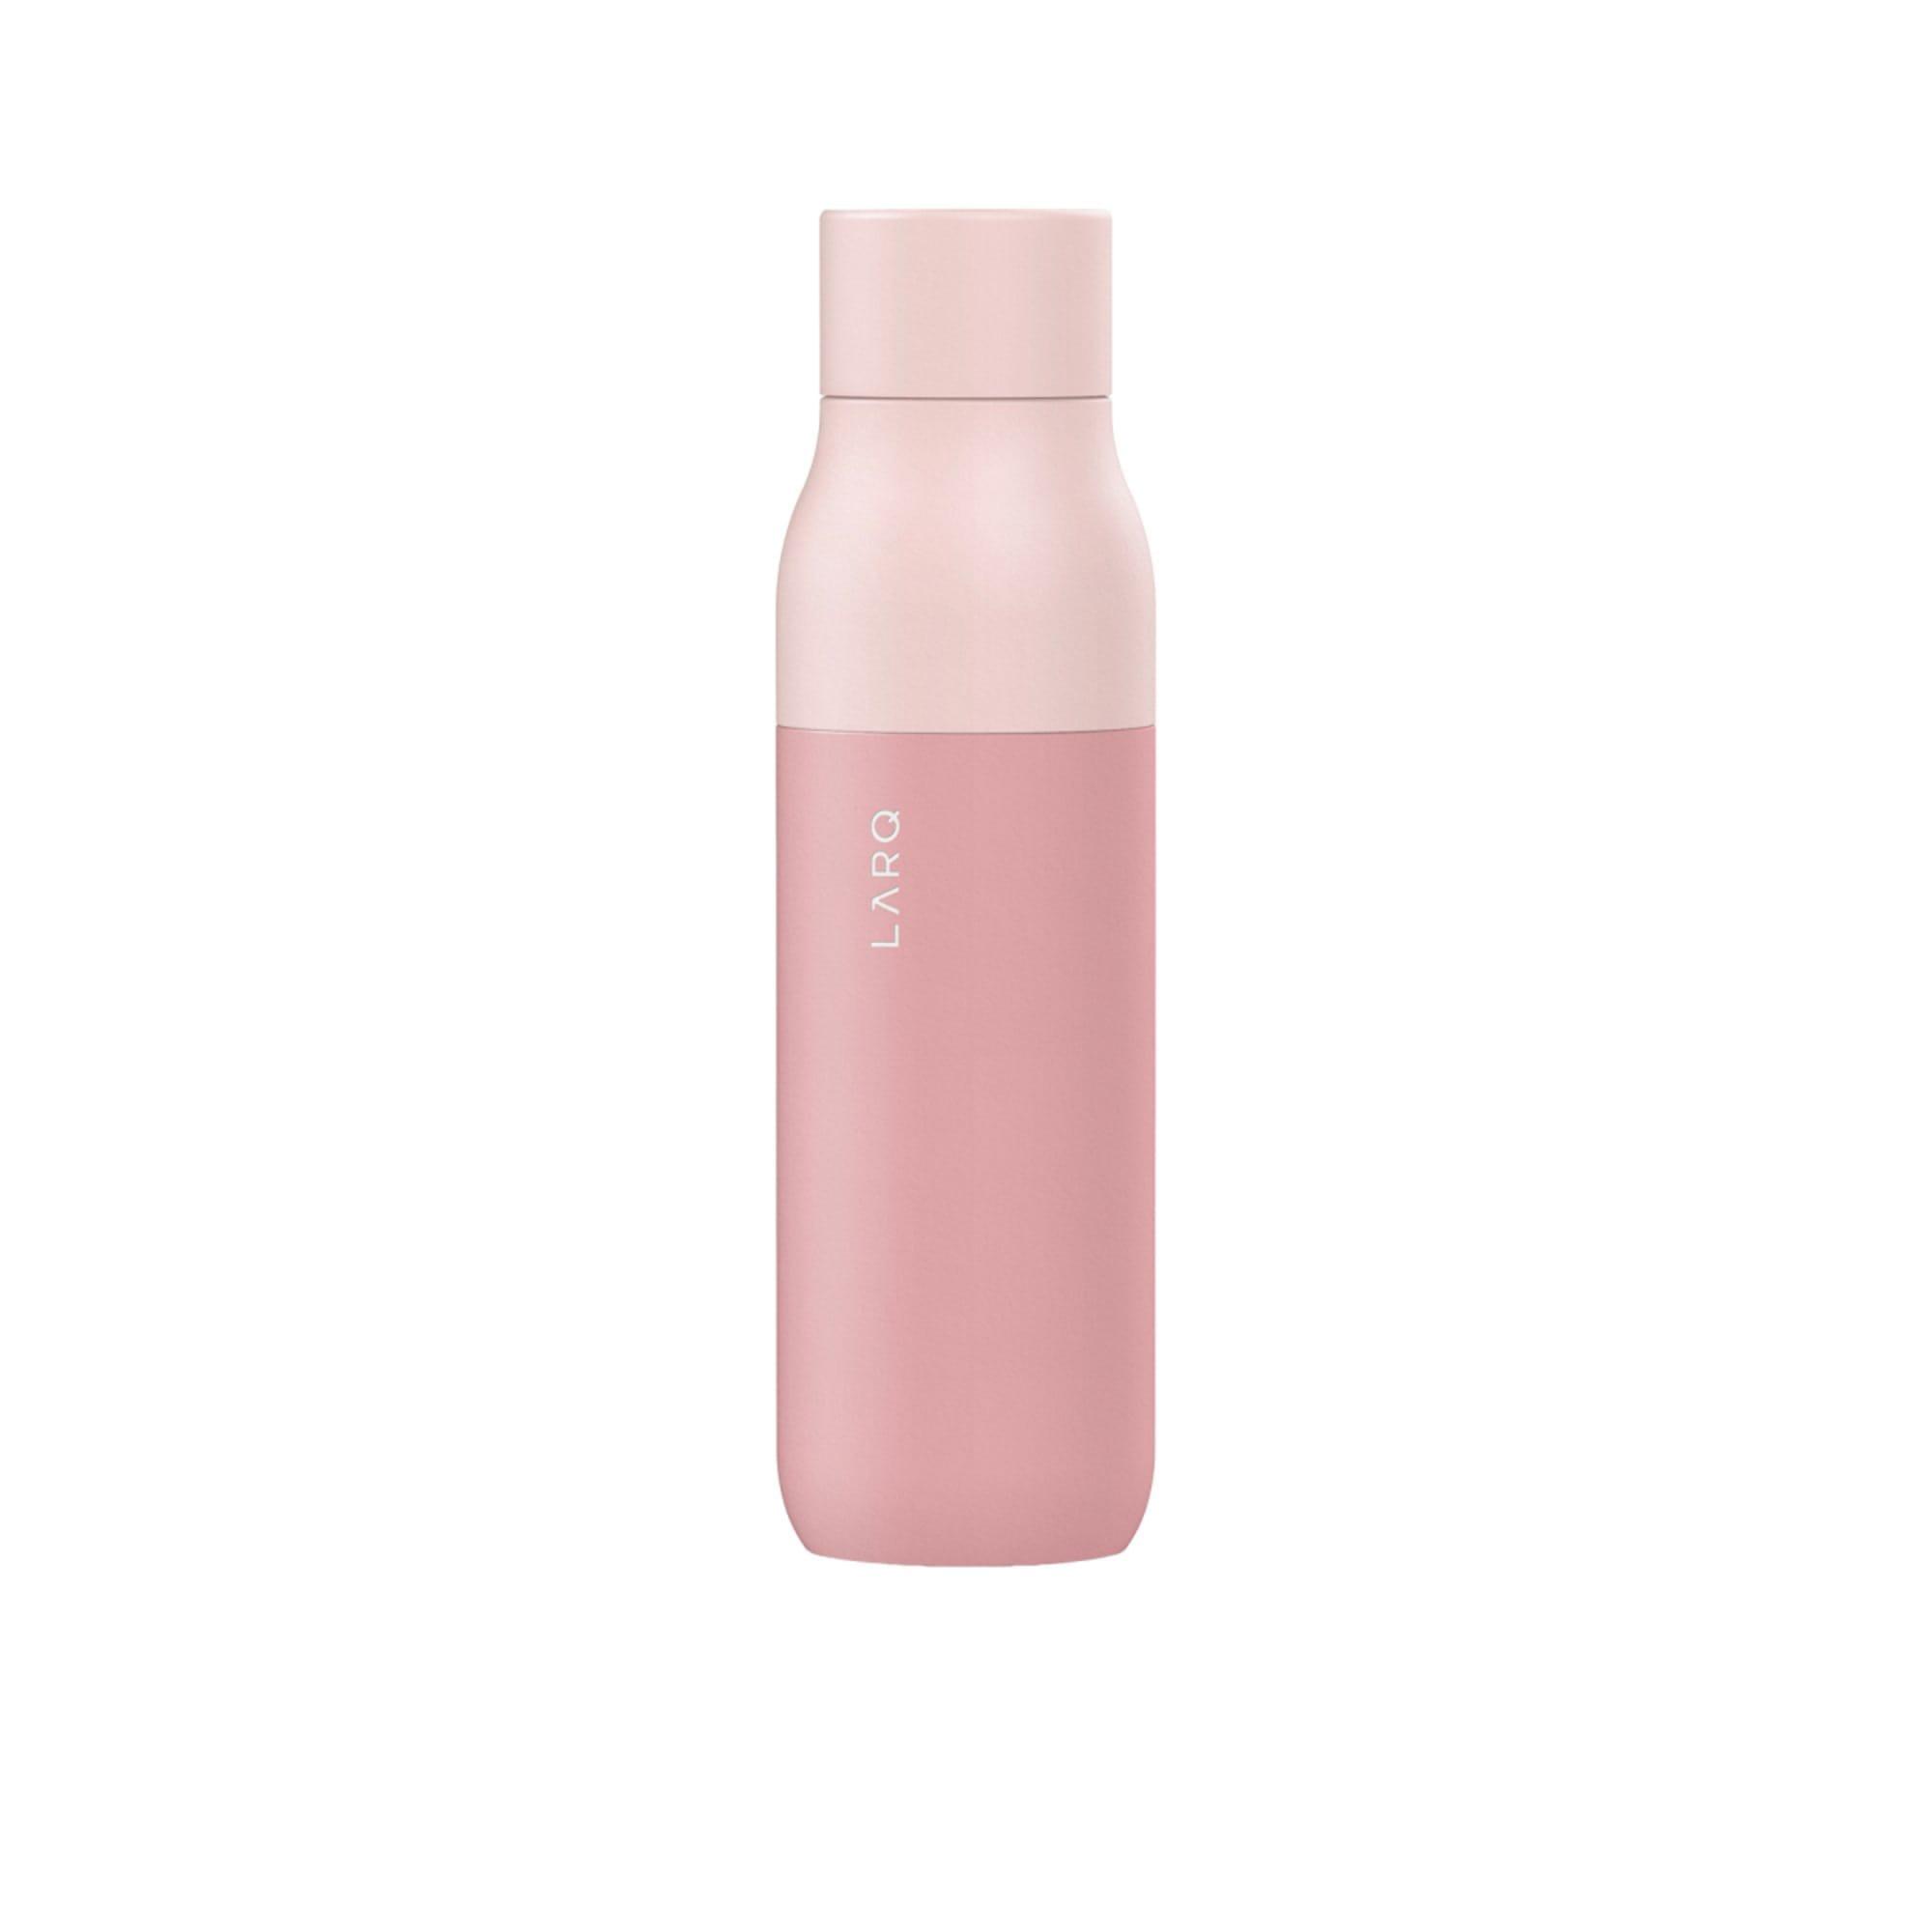 LARQ PureVis Insulated Bottle 500ml Himalayan Pink Image 1